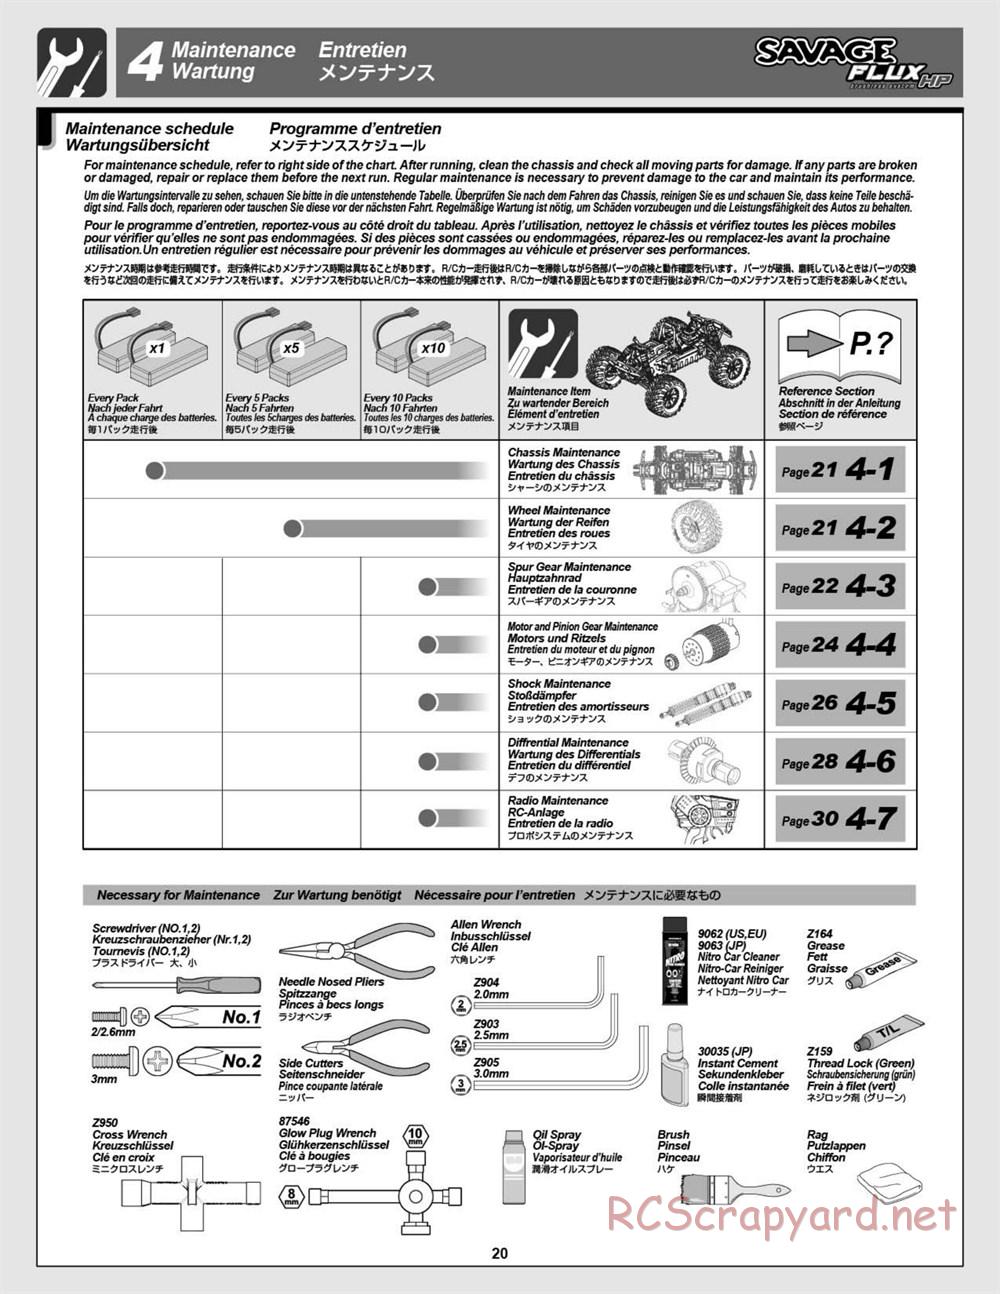 HPI - Savage Flux HP - Manual - Page 20